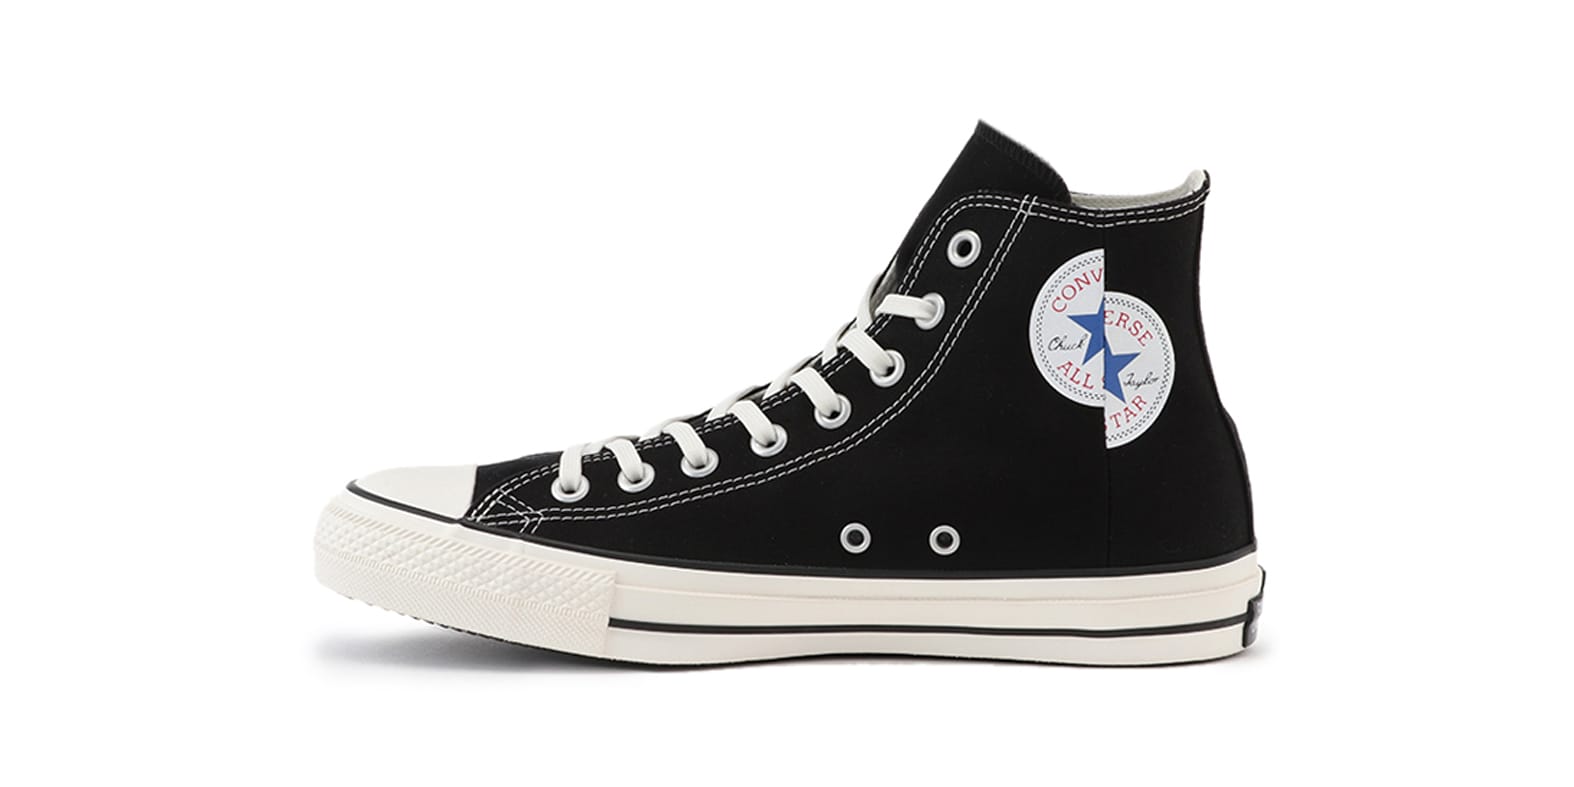 white converse high tops used